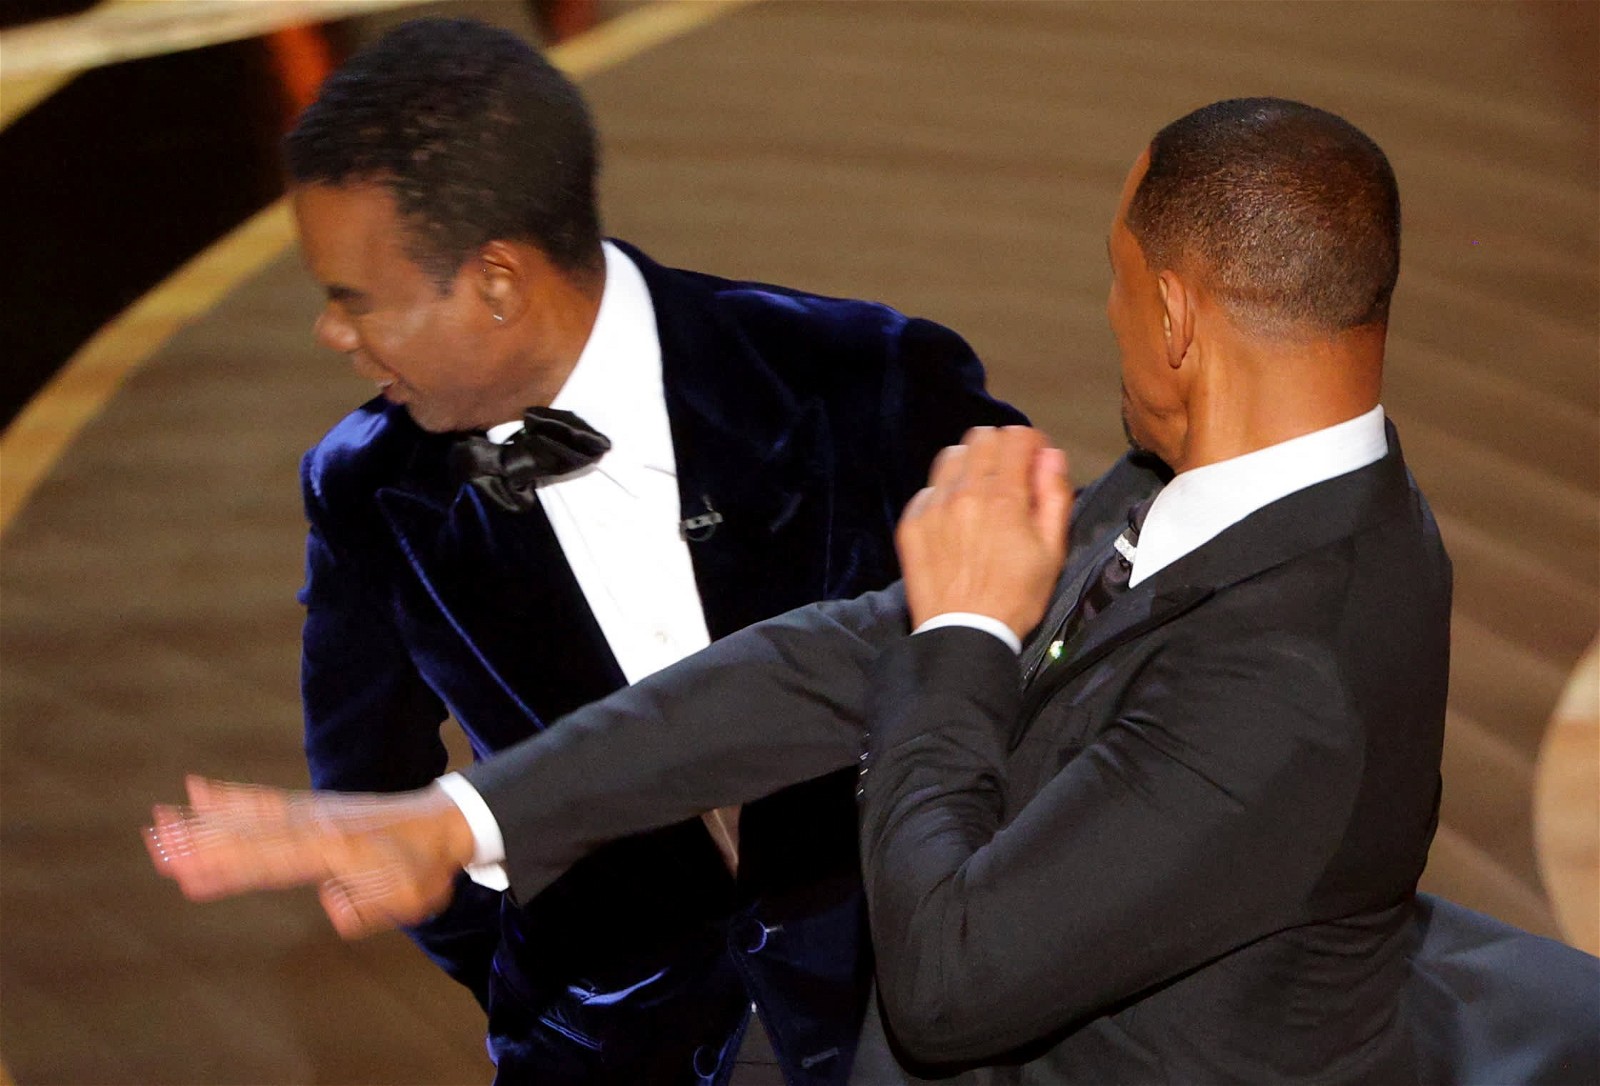 Chris Rock getting slapped by Will Smith during the 95th Academy Awards 